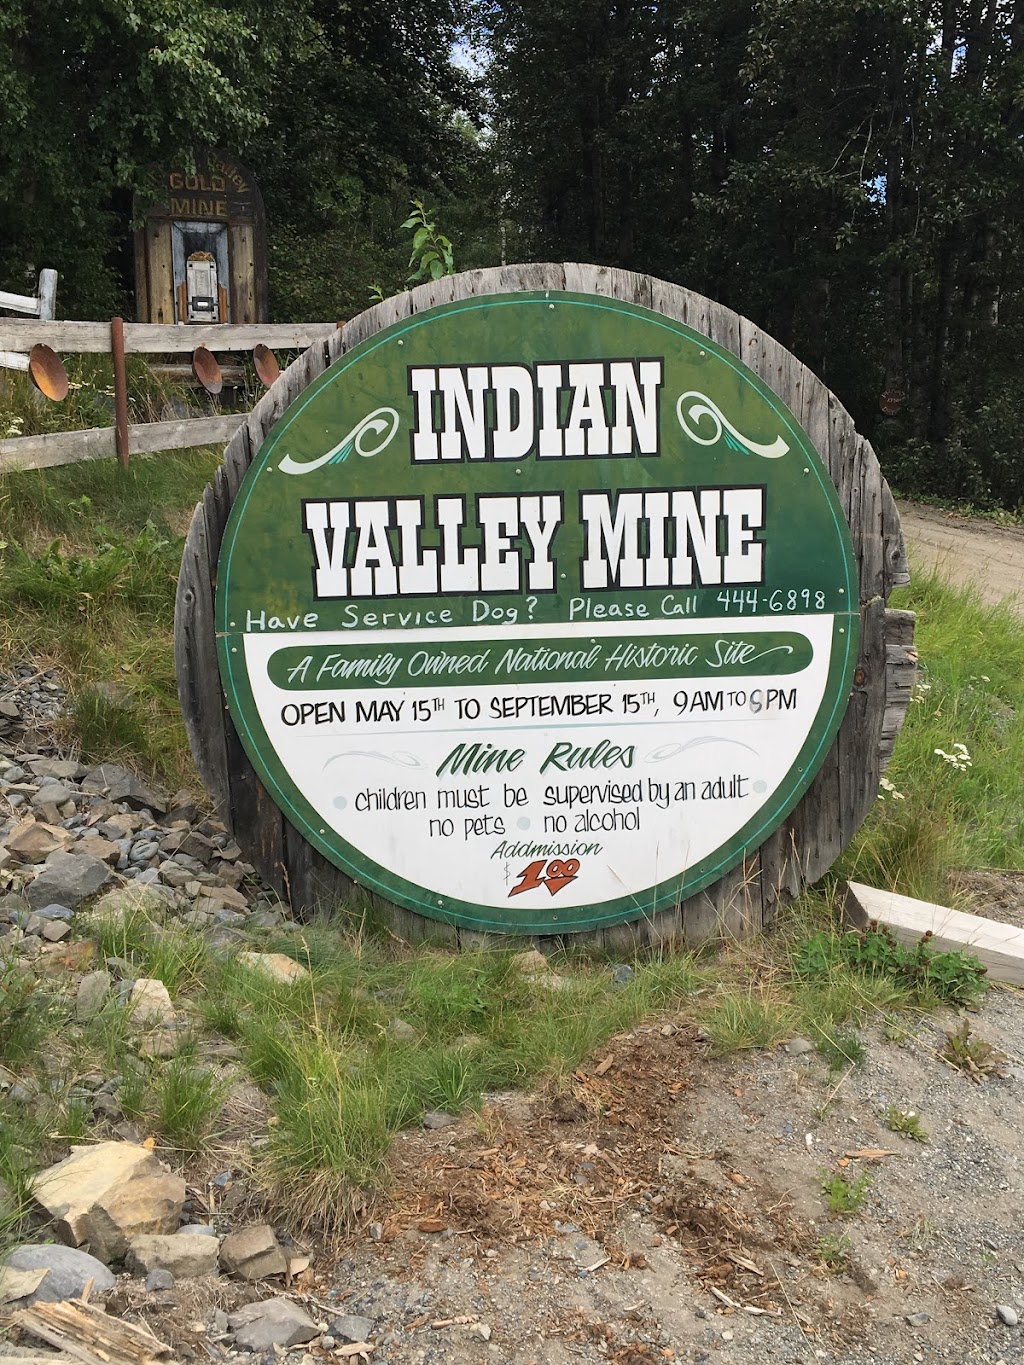 Indian Valley Mine & Gifts - museum  | Photo 8 of 10 | Address: 27301 Seward Hwy, Indian, AK 99540, USA | Phone: (907) 444-6898